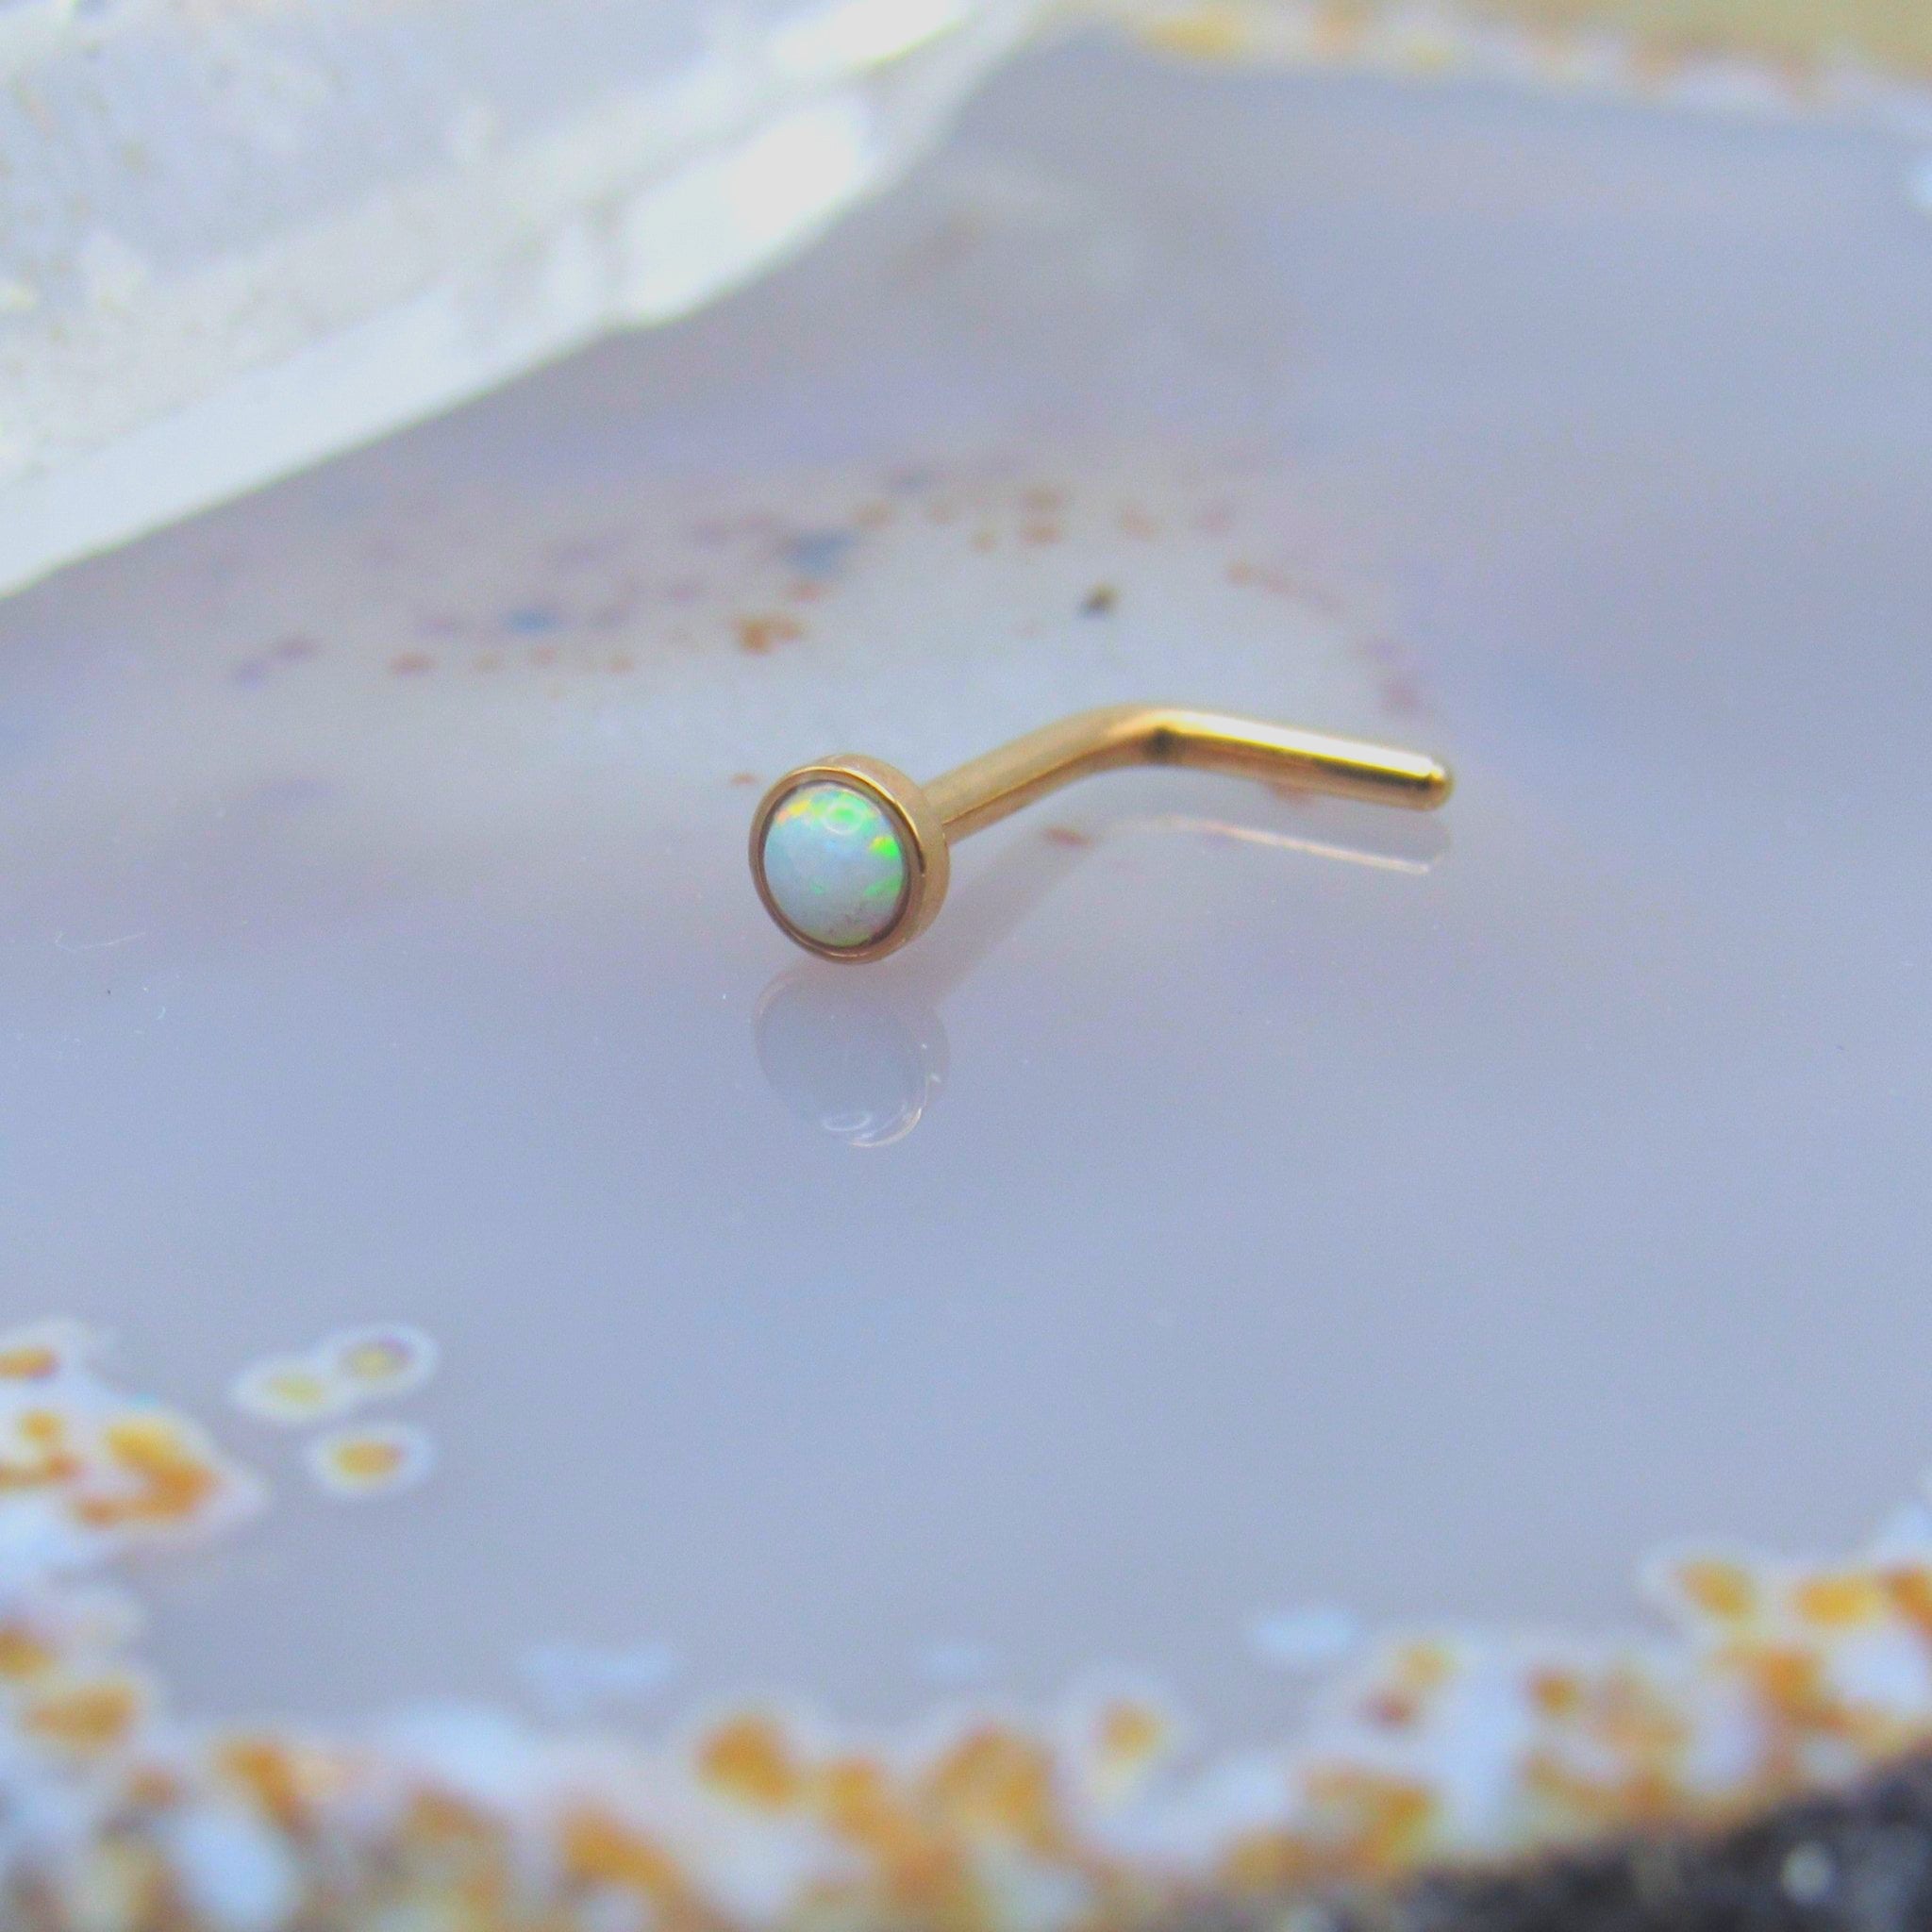 Amazon.com: Surgical Steel Nose Ring Stud - Opal Nose Stud, Nose Piercing  Jewelry : Handmade Products